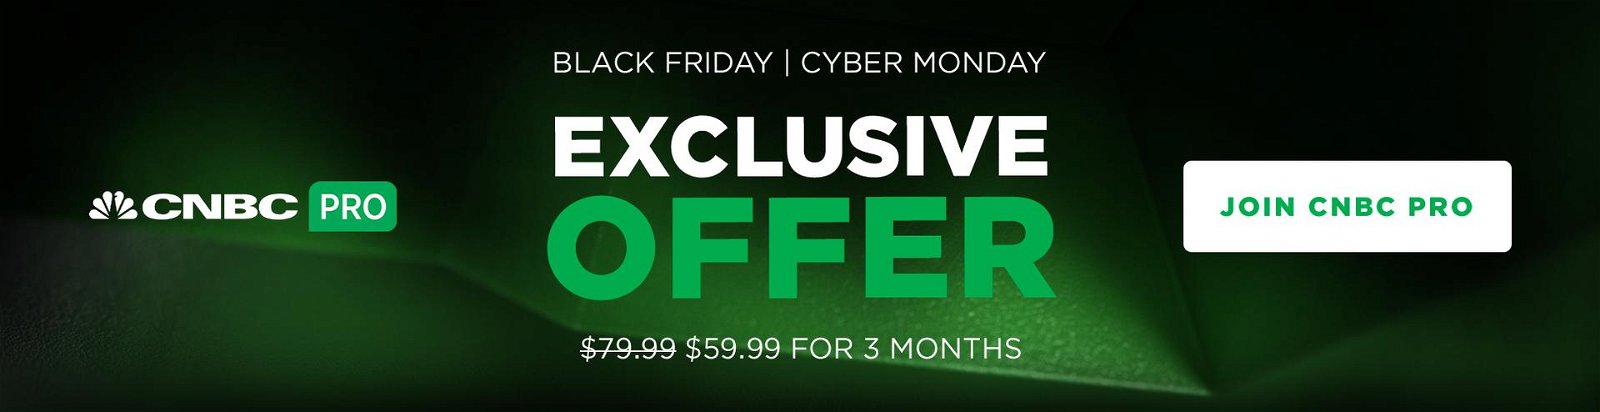 Join CNBC Pro for the Cyber Monday Sale